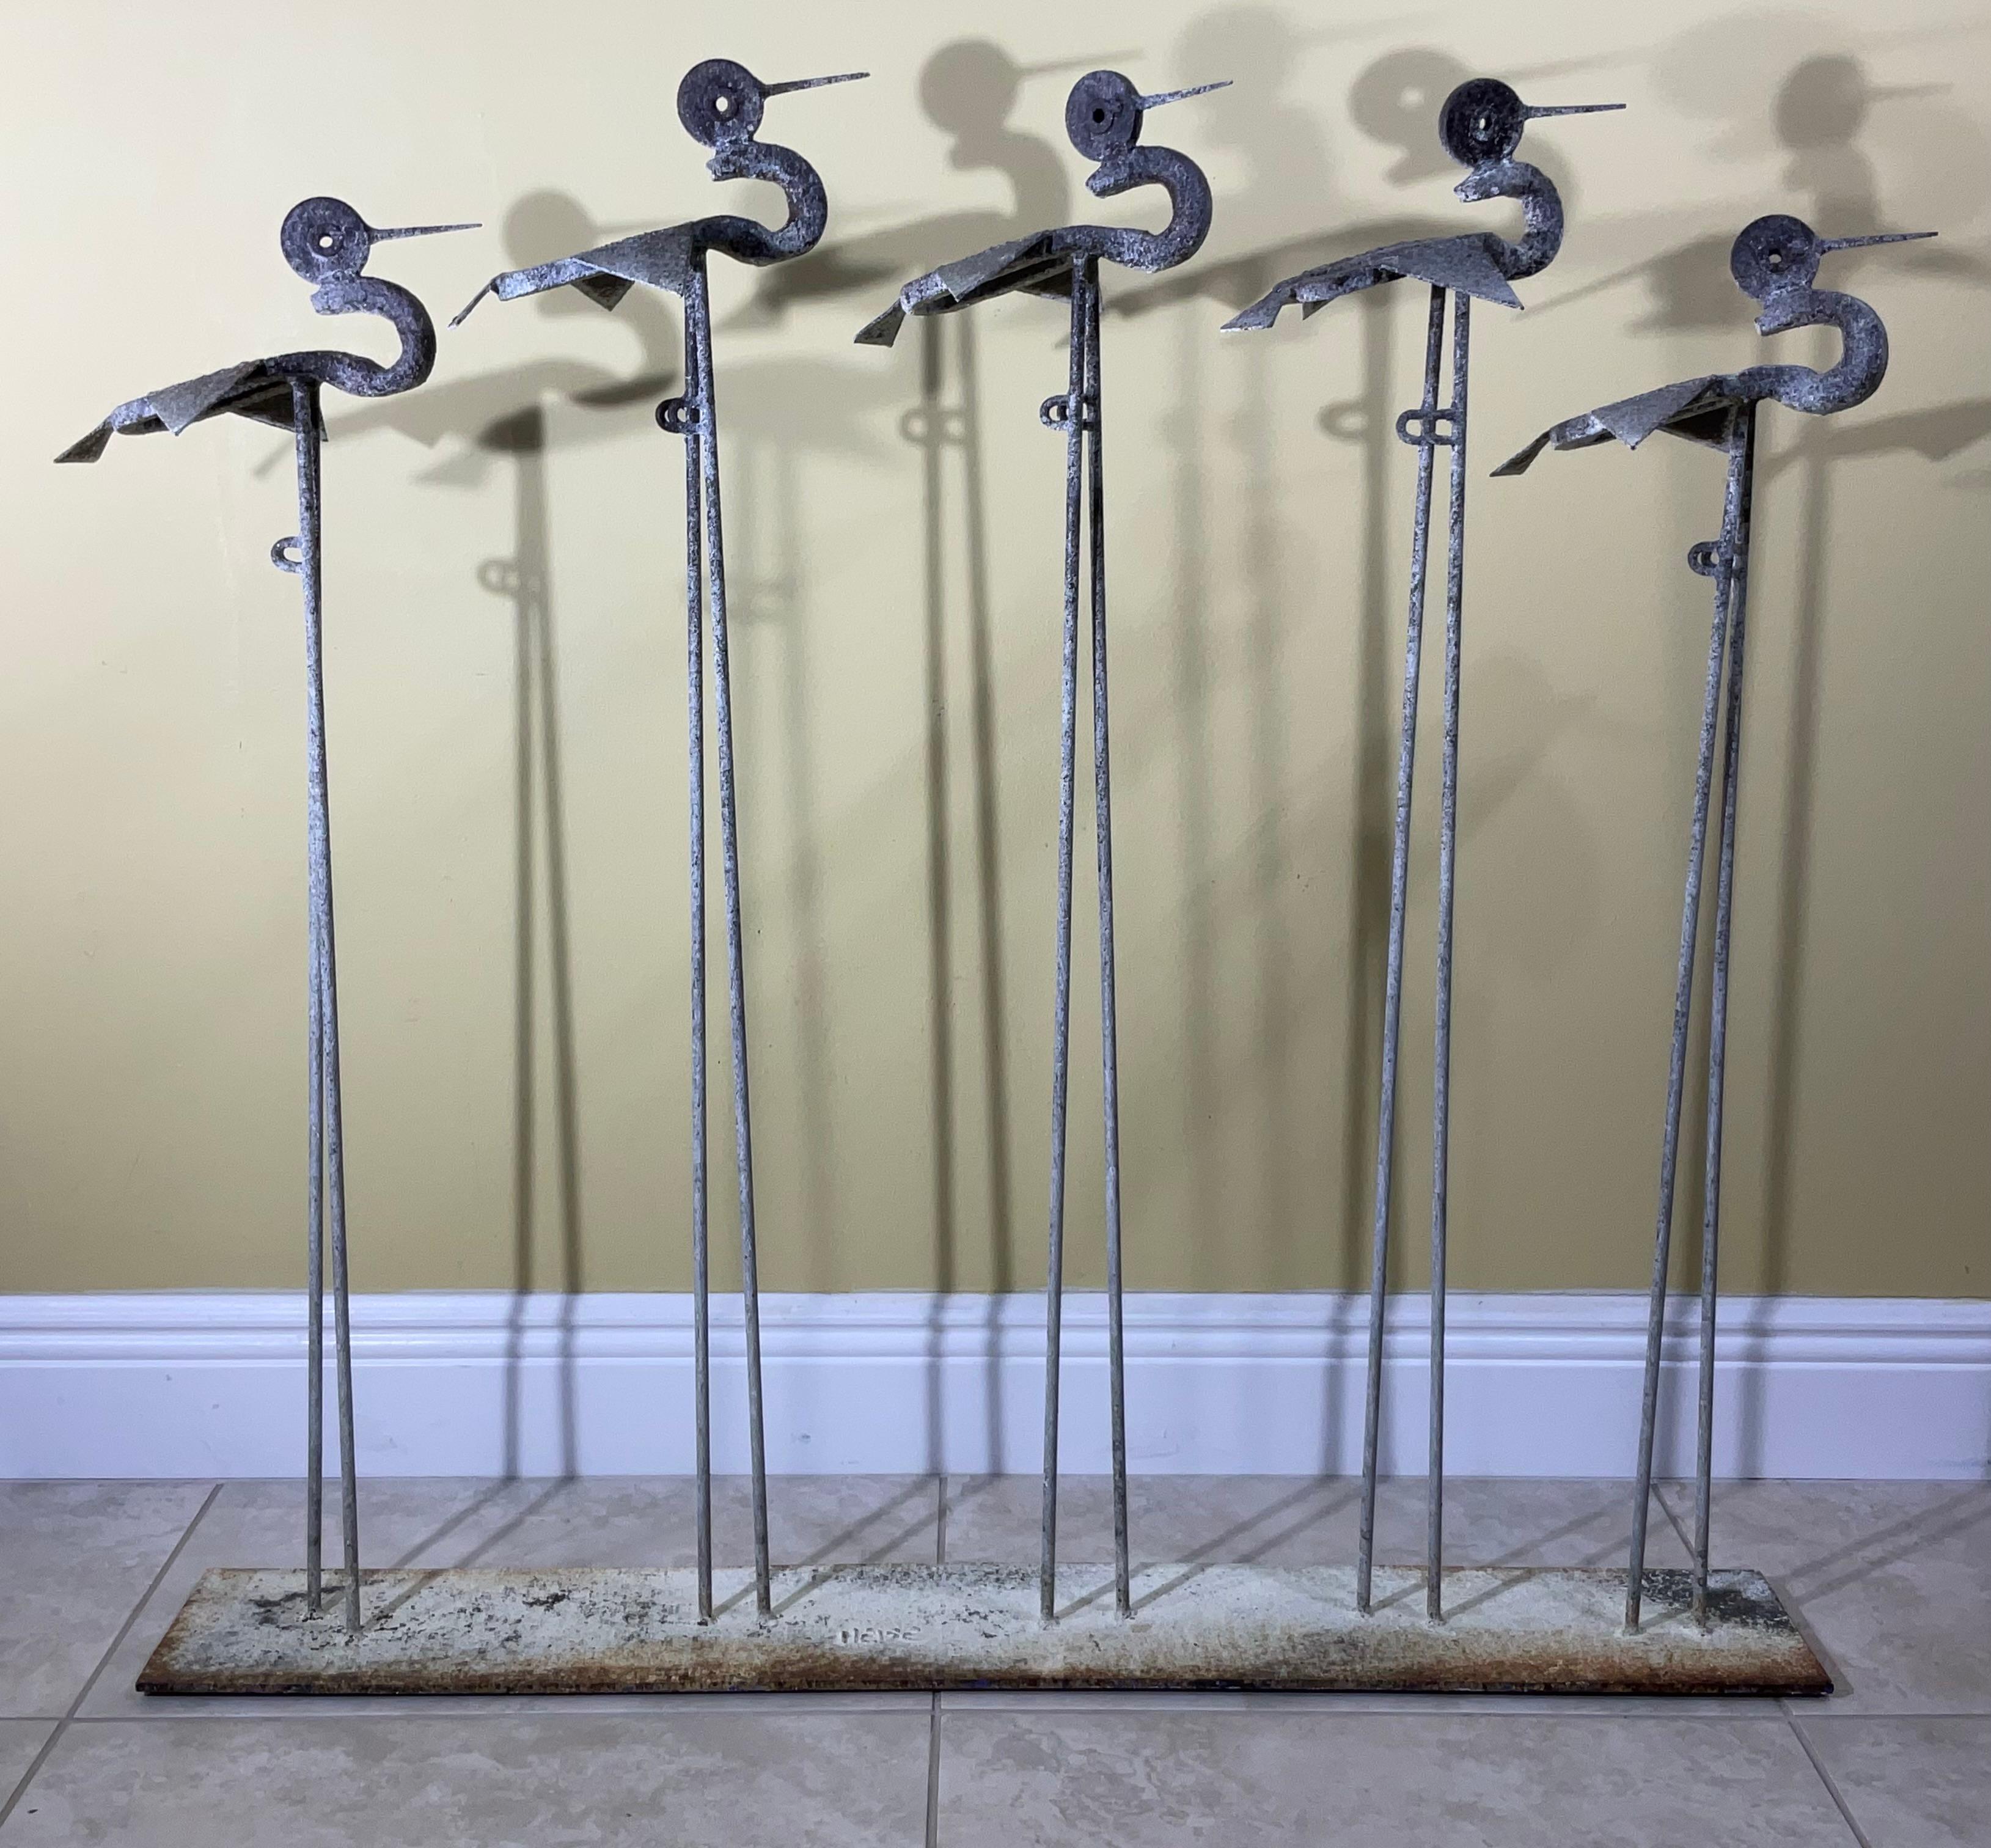 
Exceptional artistically made Industrial five Bird Sculpture art , from of solid iron , could use as sculpture decoration ,or as fireplace screen.
Professionally rust treated and seal , great looking patina .
This metal art sculpting involves many